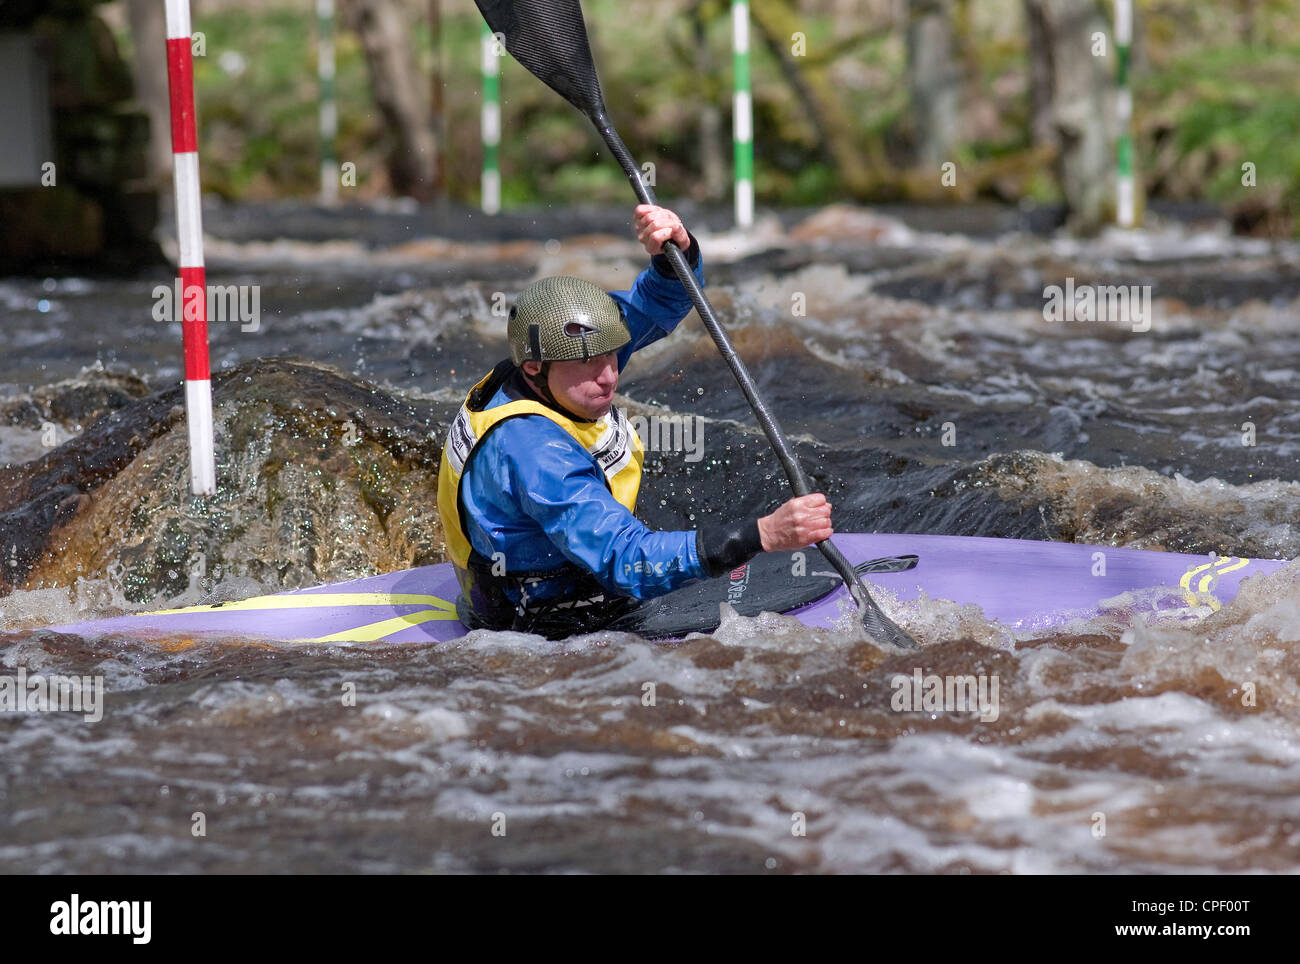 Male competitor in a slalom kayak competition, at the Washburn Valley, North Yorkshire April 2012 Stock Photo